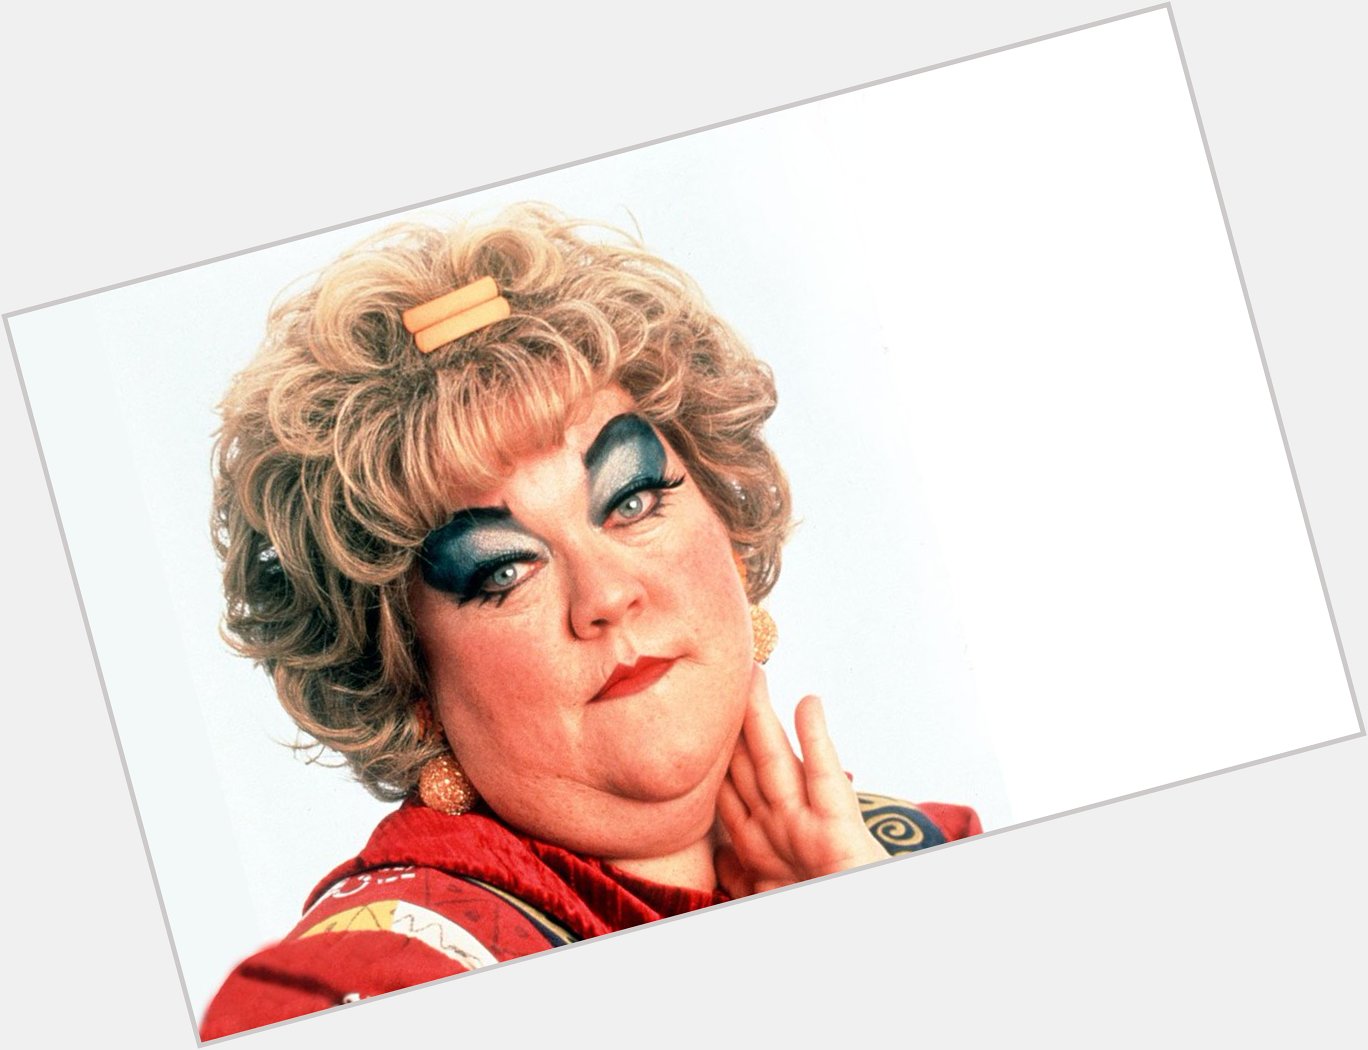 Happy Birthday to American actress and comedian Kathy Kinney born on November 3, 1954 